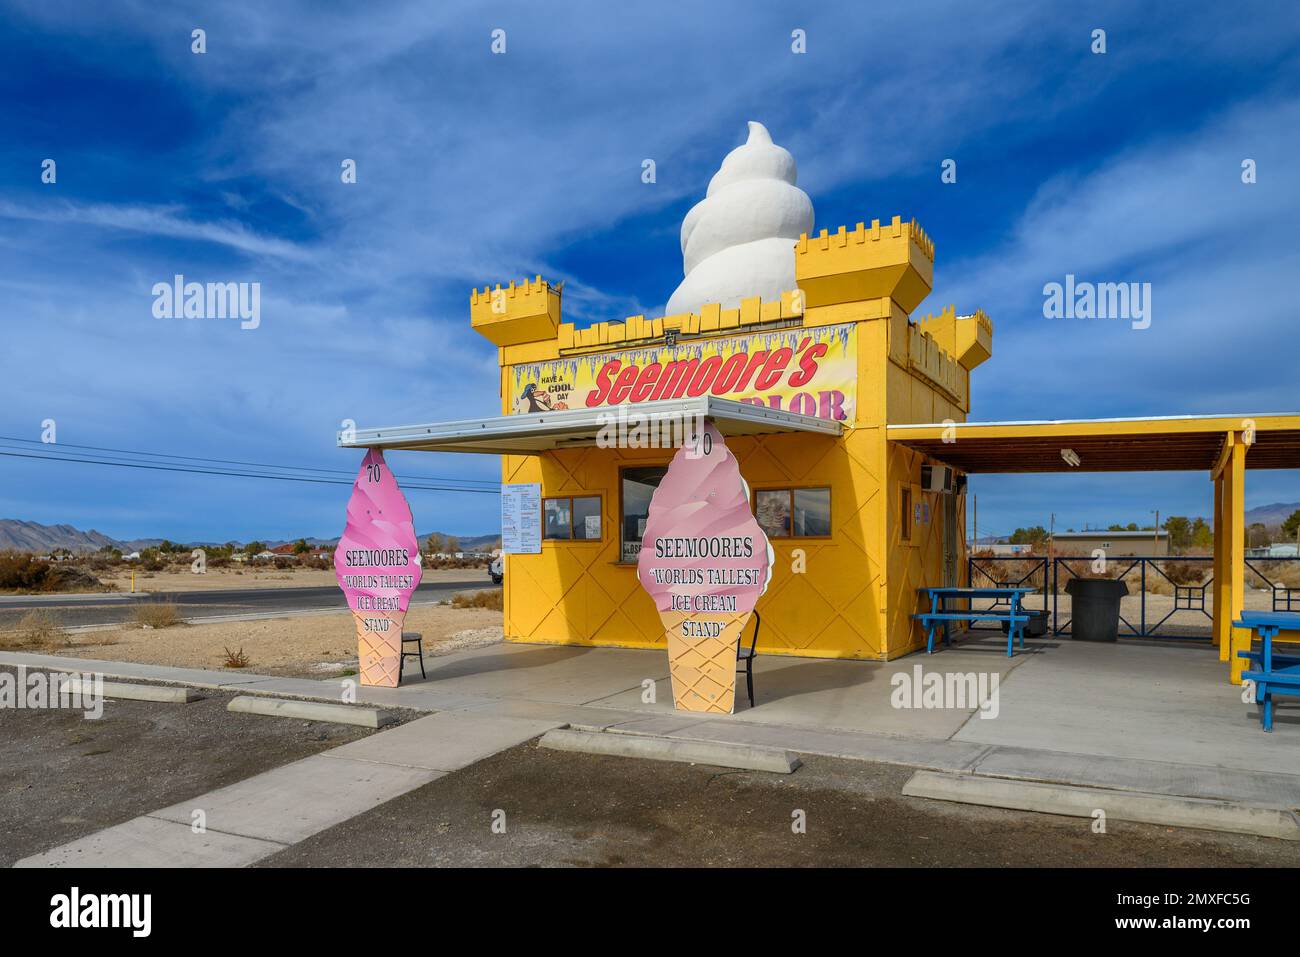 https://c8.alamy.com/comp/2MXFC5G/a-low-angle-view-of-an-ice-cream-stand-in-rural-nevada-usa-2MXFC5G.jpg